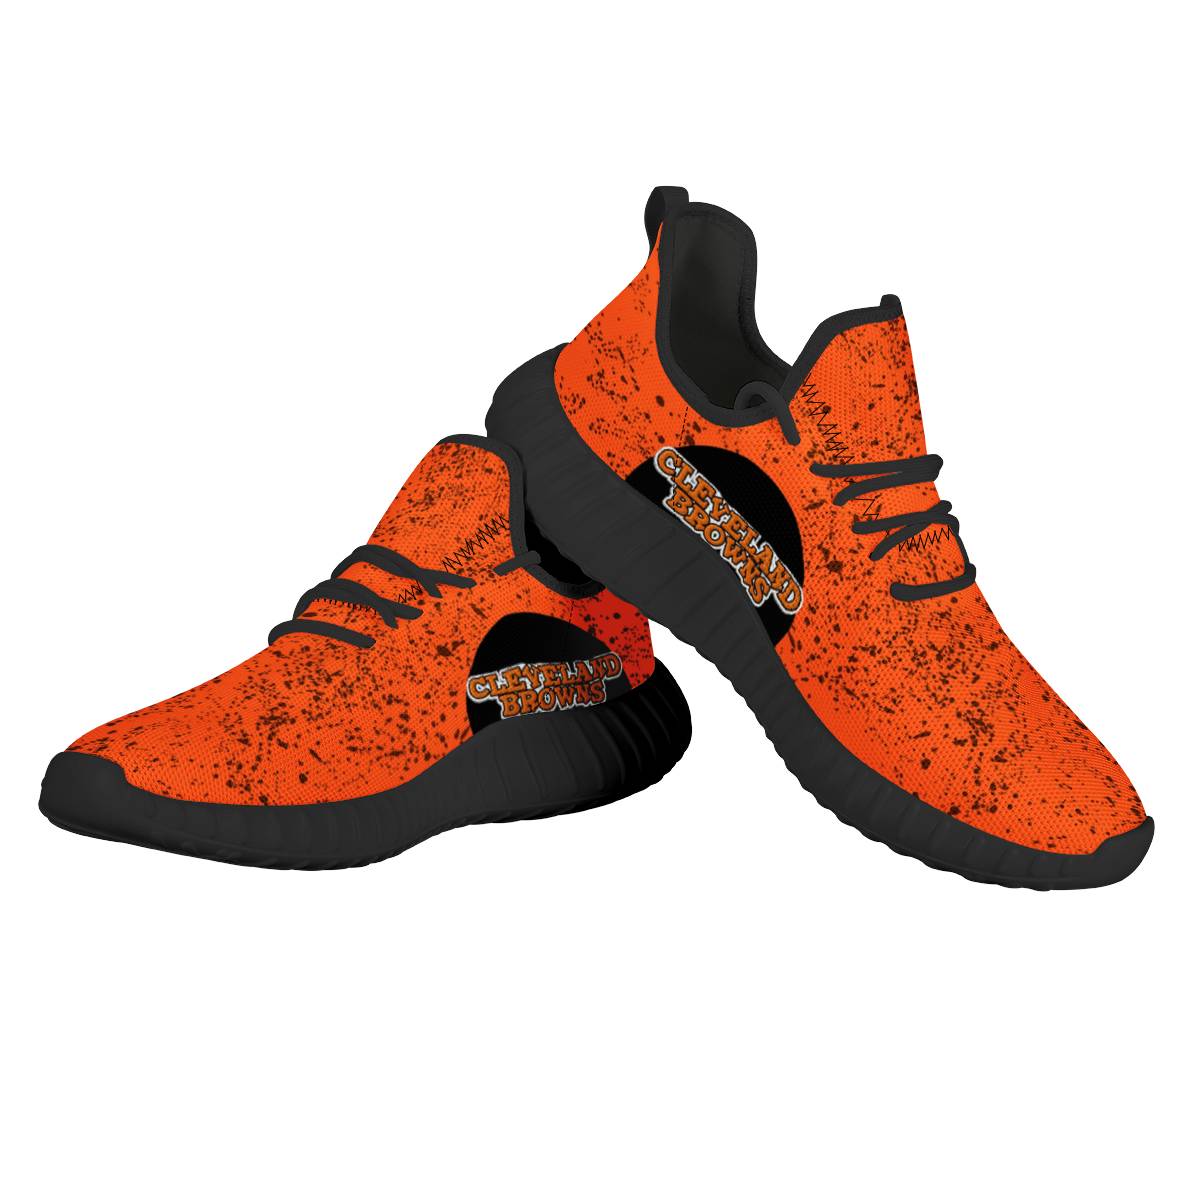 Men's Cleveland Browns Mesh Knit Sneakers/Shoes 001